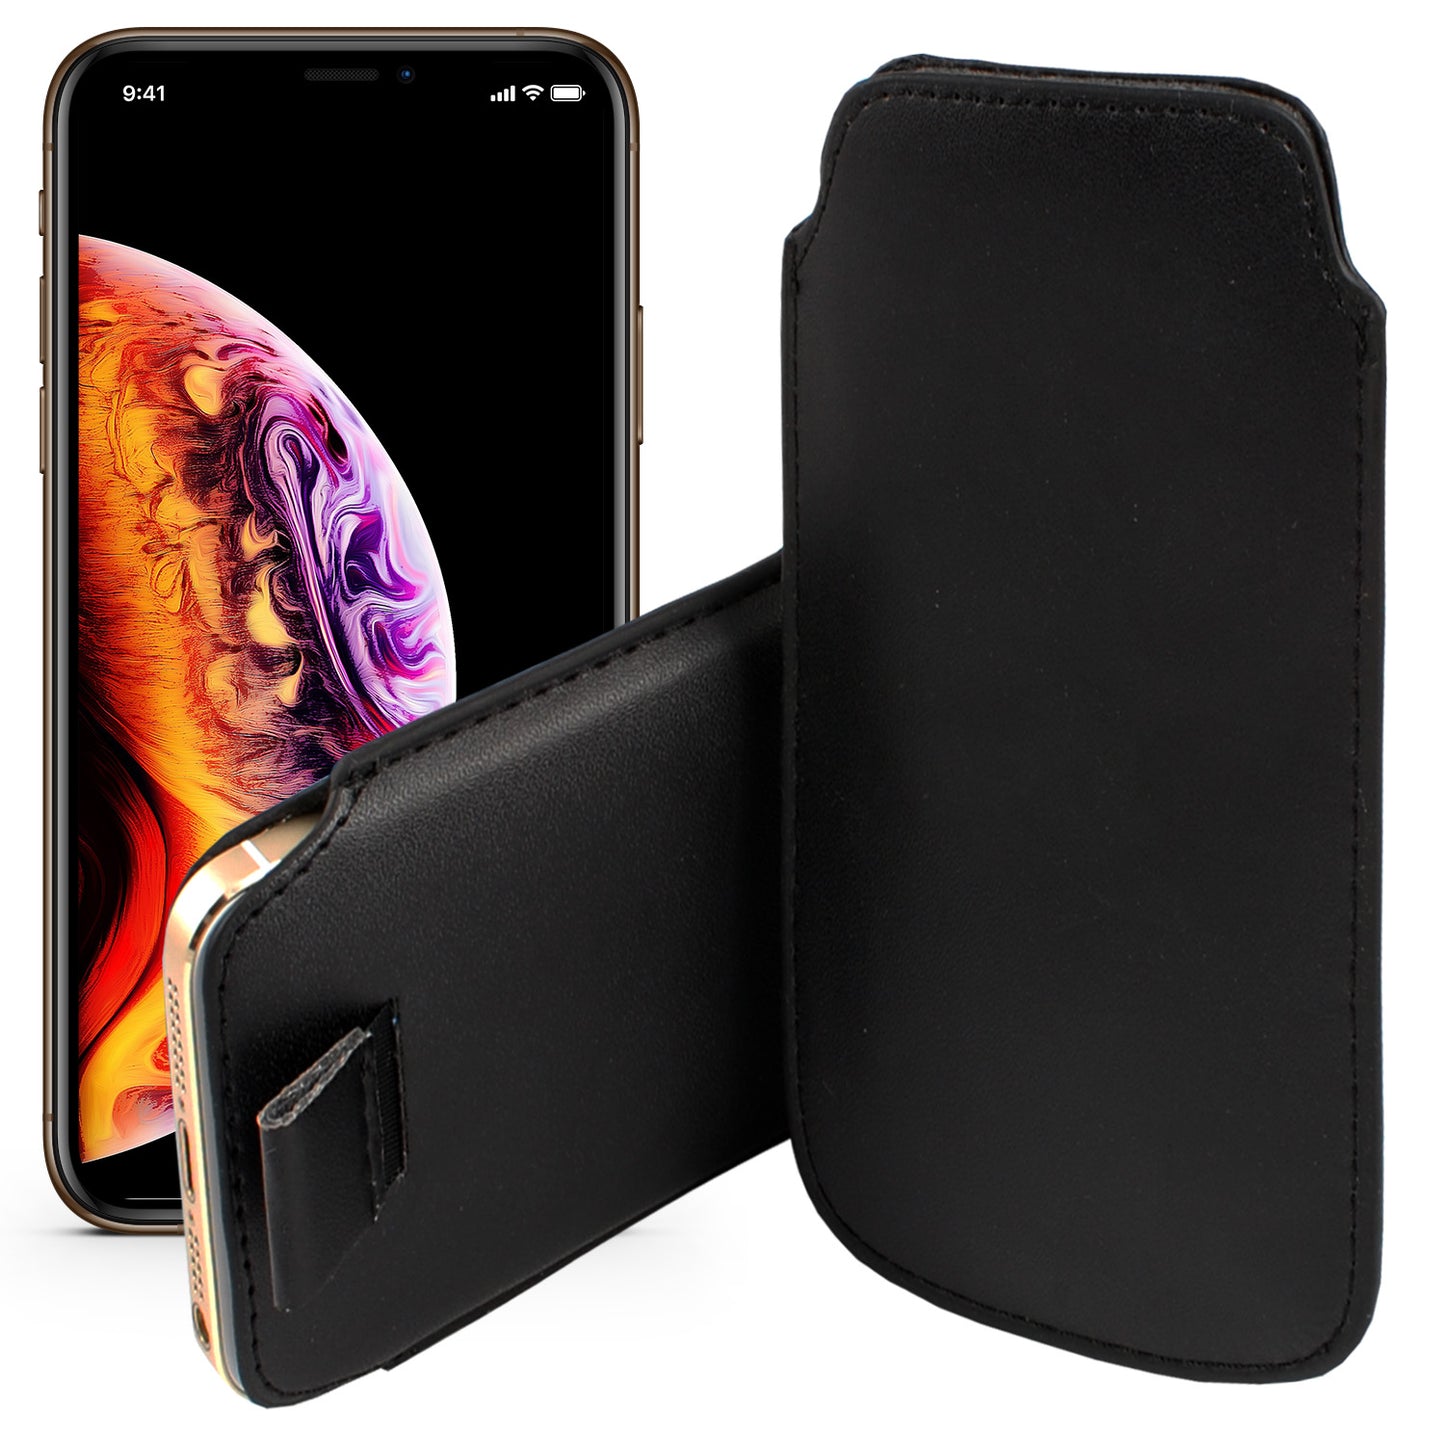 MEZON Apple iPhone 8 Plus (5.5") Black Pull Tab Slim Faux Leather Pouch Sleeve Case Wireless Charging Compatible